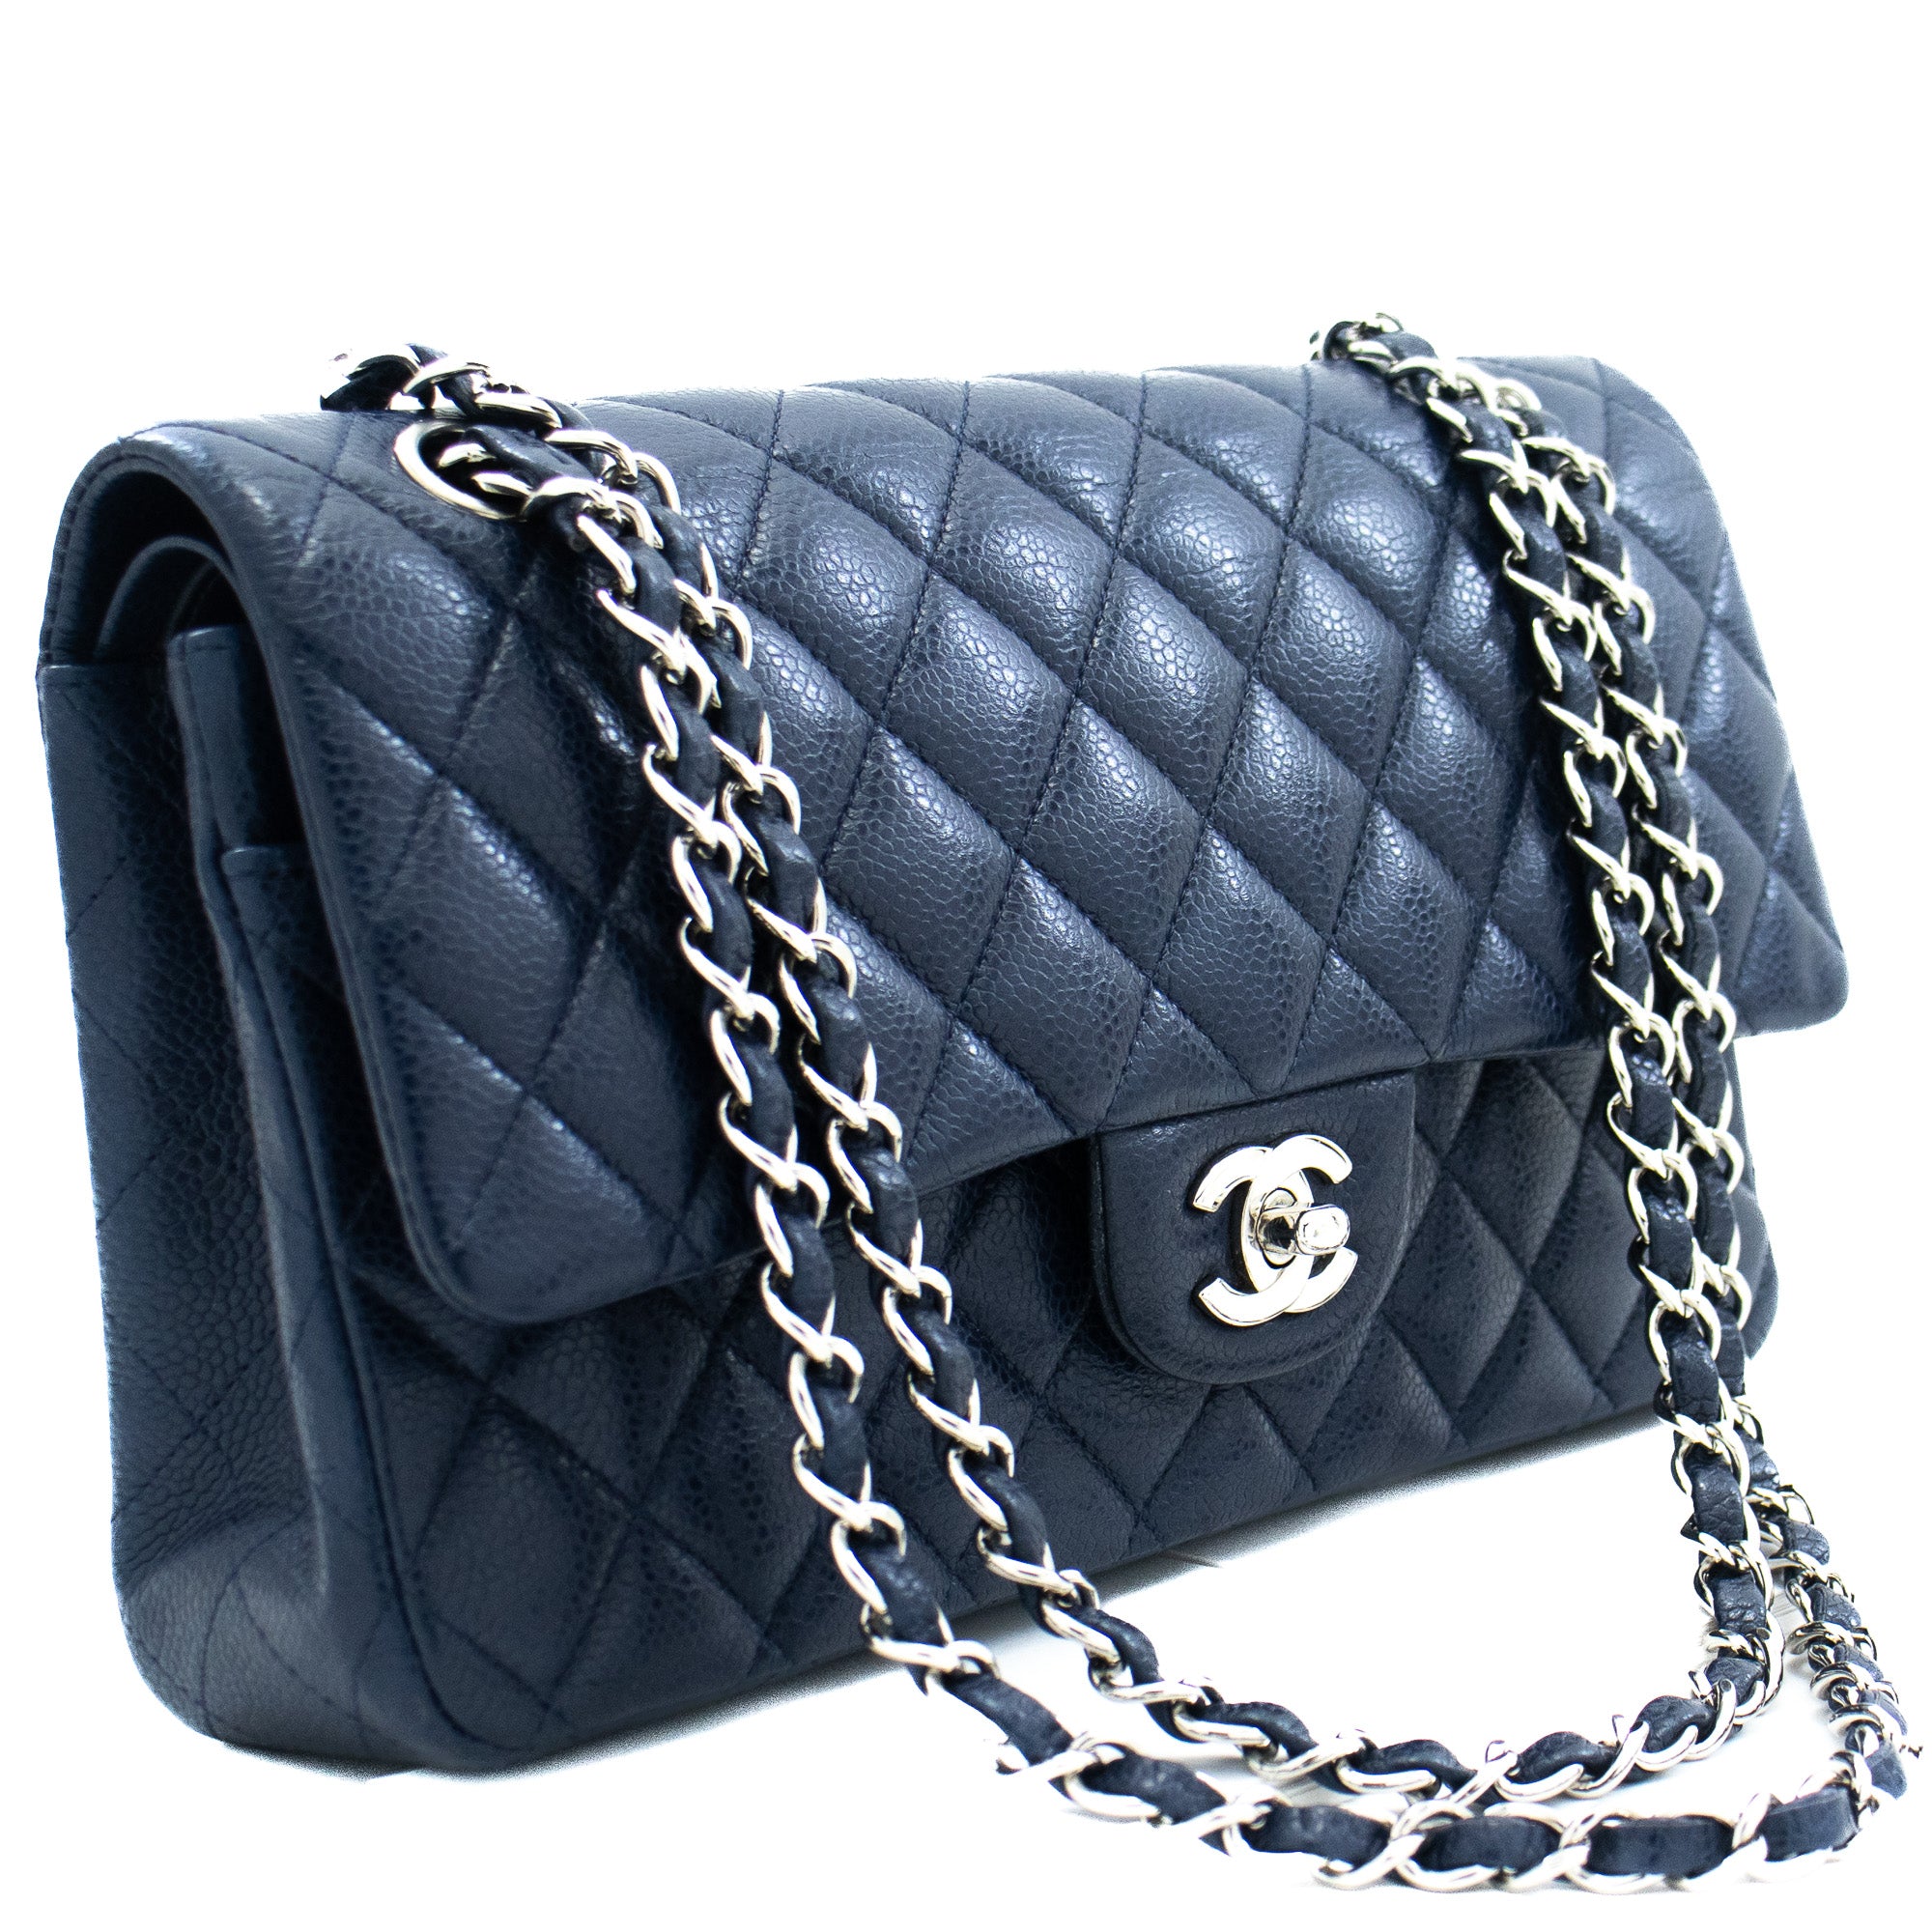 Chanel White Medium Classic Flap Bag in Caviar Leather with Silver Har   Sellier